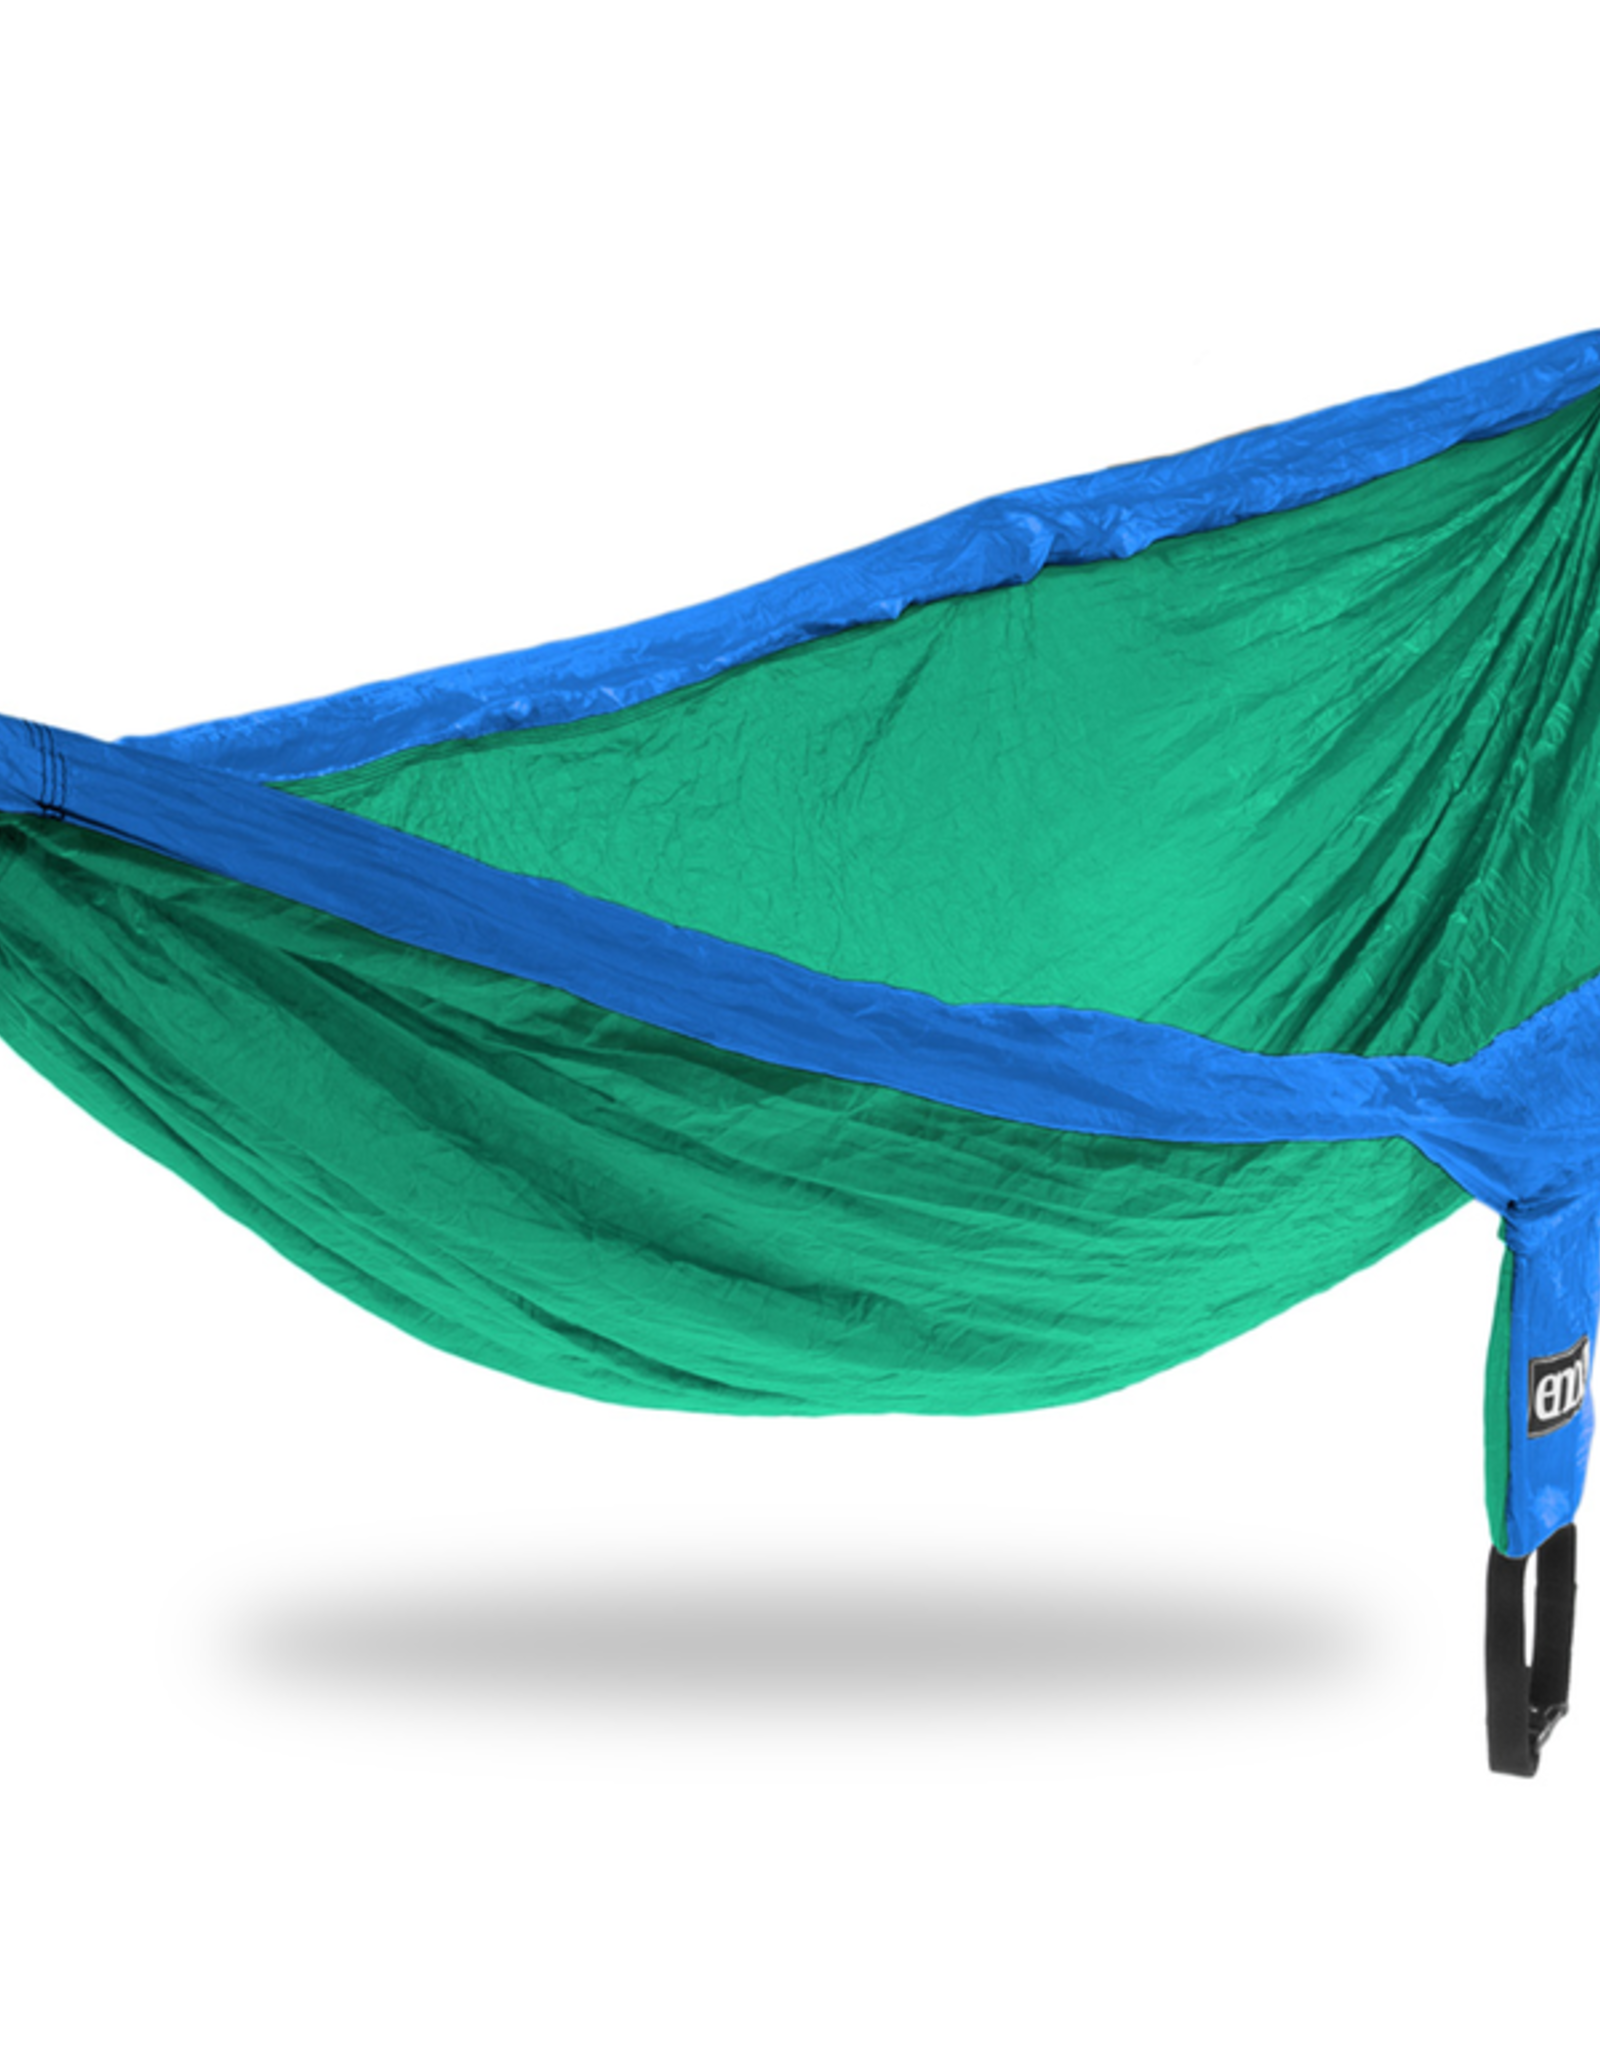 Eagles Nest Outfitters ENO DoubleNest Hammock